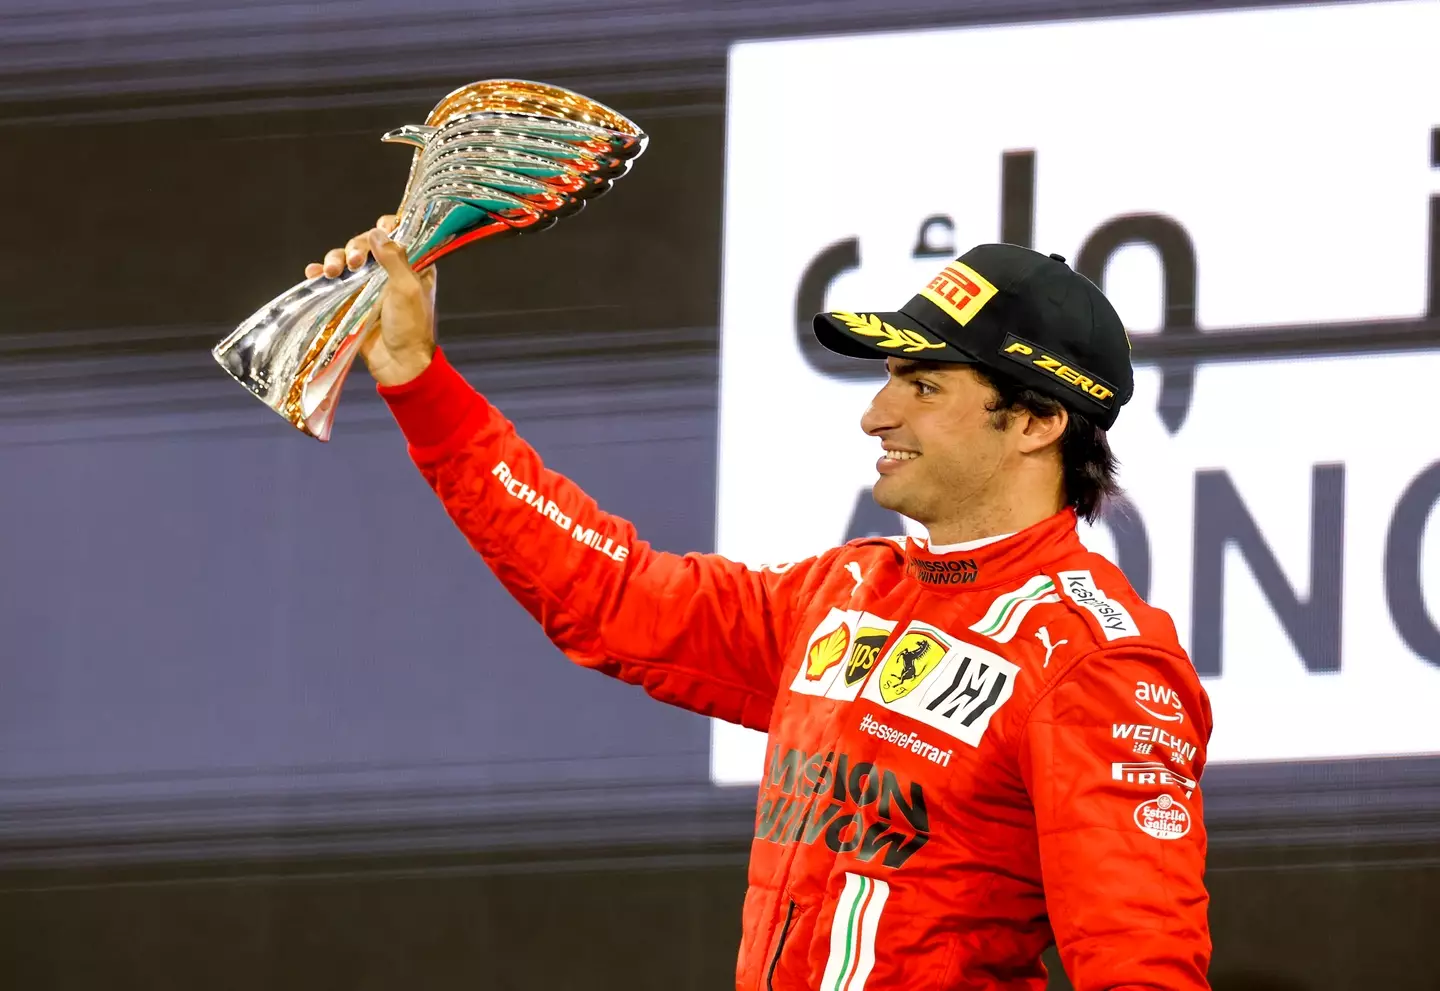 Sainz was the odd man out on the podium of title rivals on Sunday. Image: PA Images